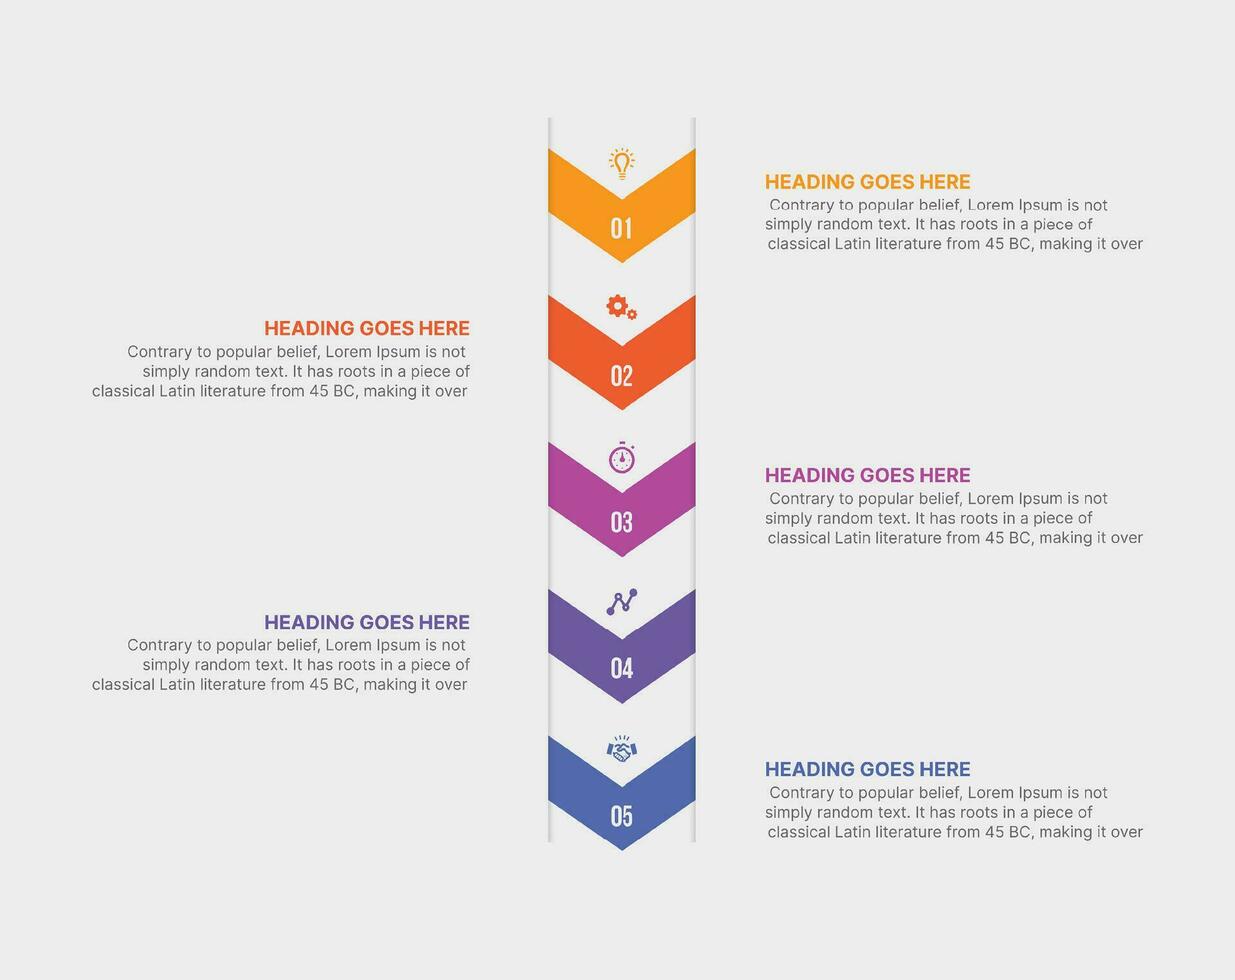 Five steps, Options Circle Timeline Vector Business Infographic Modern Design Template